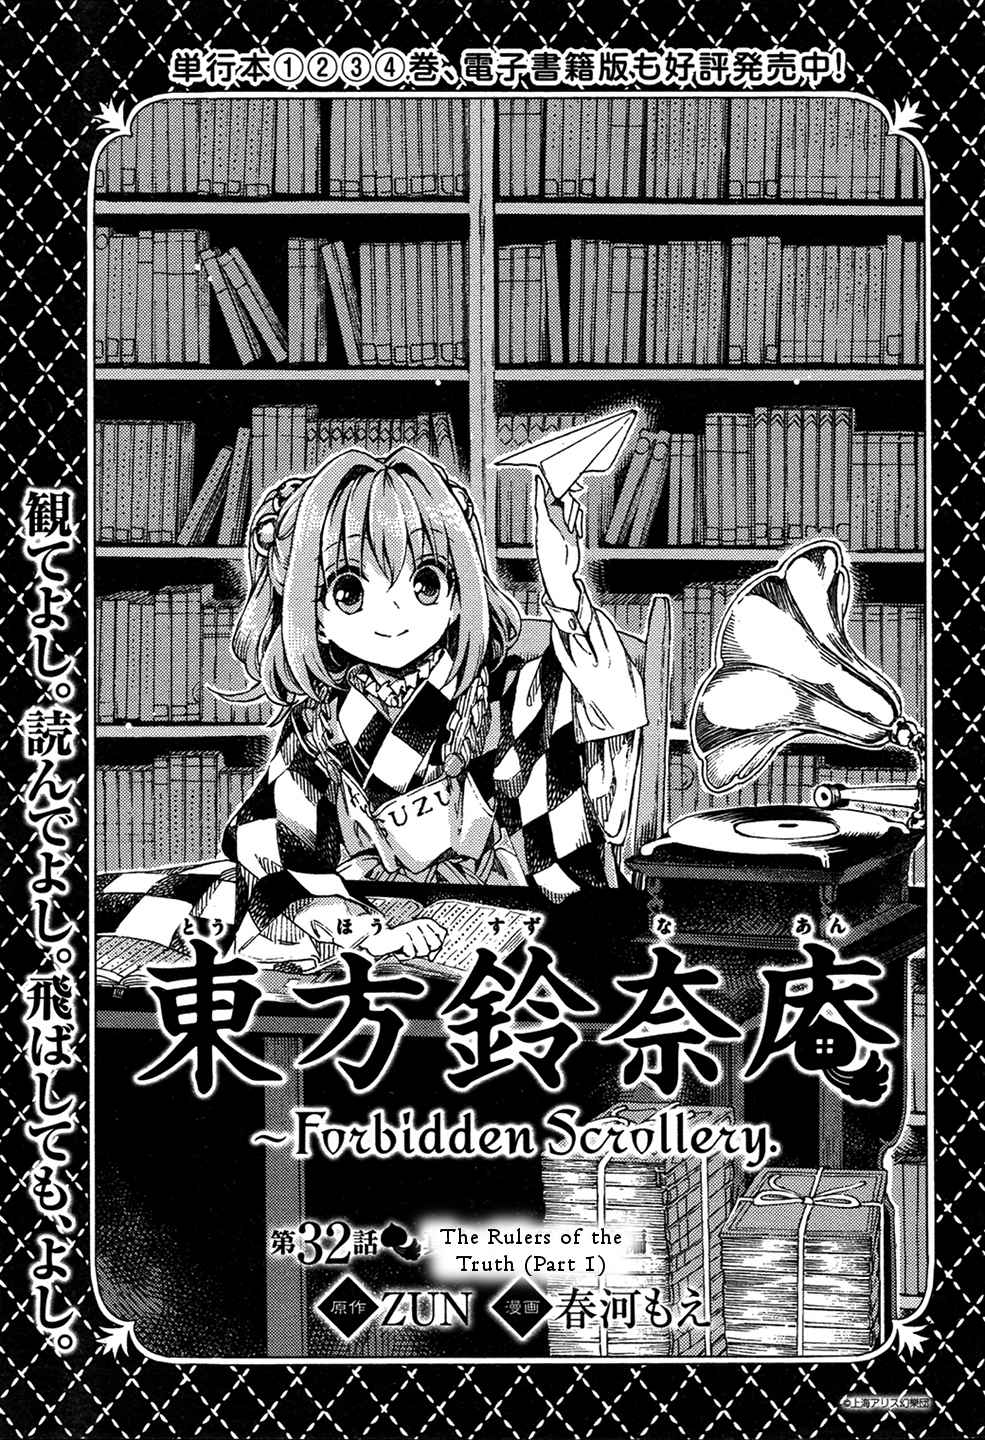 Touhou Suzunaan ~ Forbidden Scrollery. Vol. 5 Ch. 32 The Rulers of the Truth (Part 1)